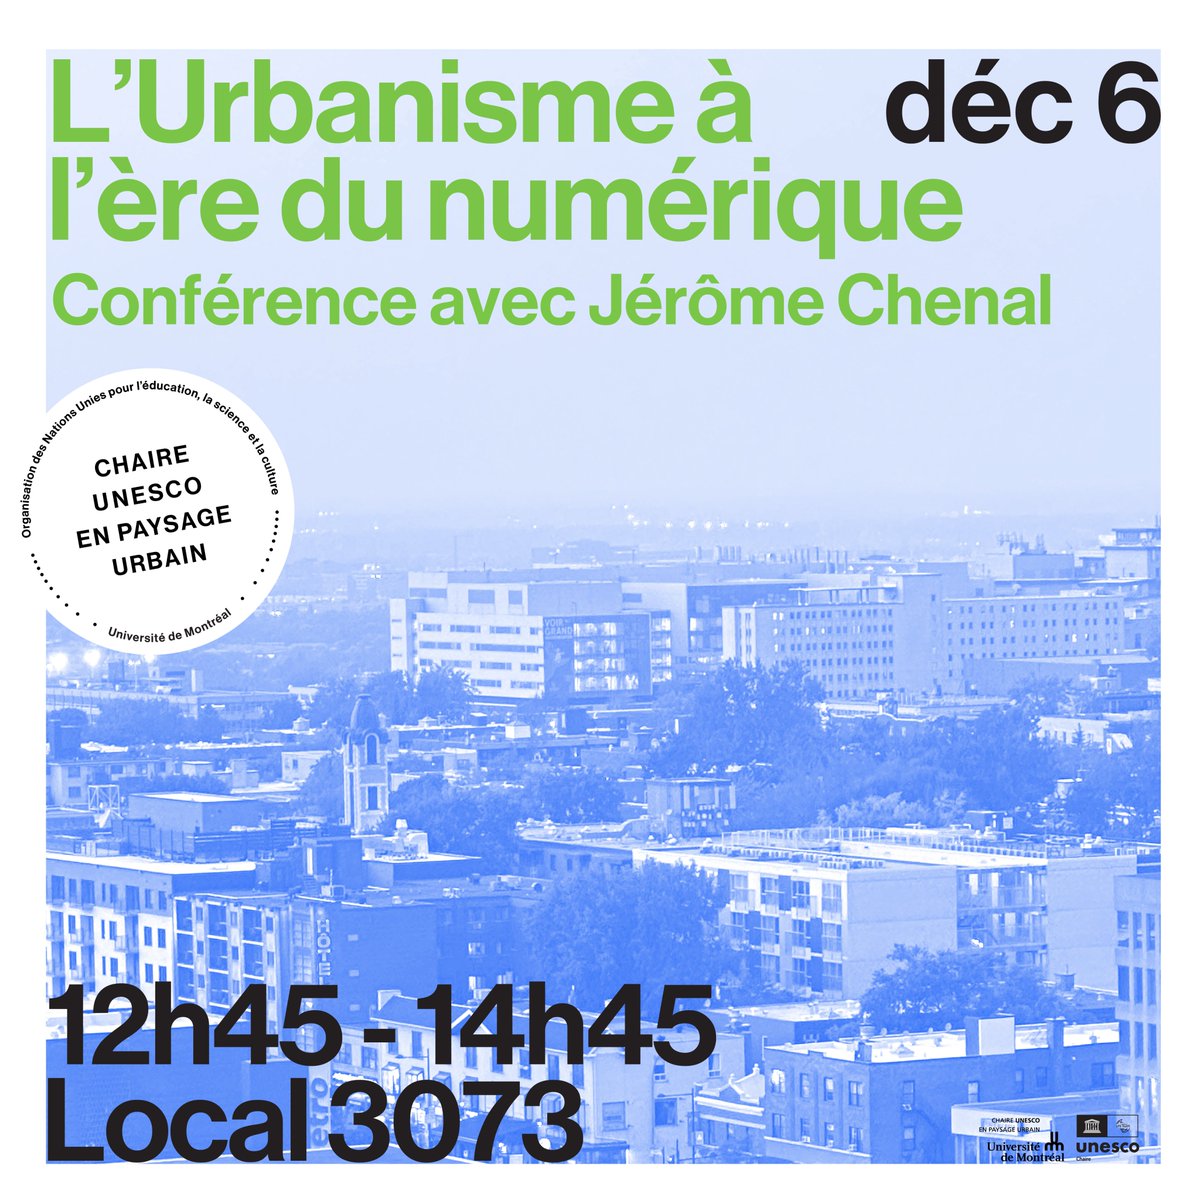 Another conference with Jérôme Chenal and Prof. Shin Koseki happening next Wednesday at UdeM's Faculty of Environmental Design/Aménagement, on the theme of Urban Planning in the Digital Age. 👉 More details here: lnkd.in/eUjXk5Mc